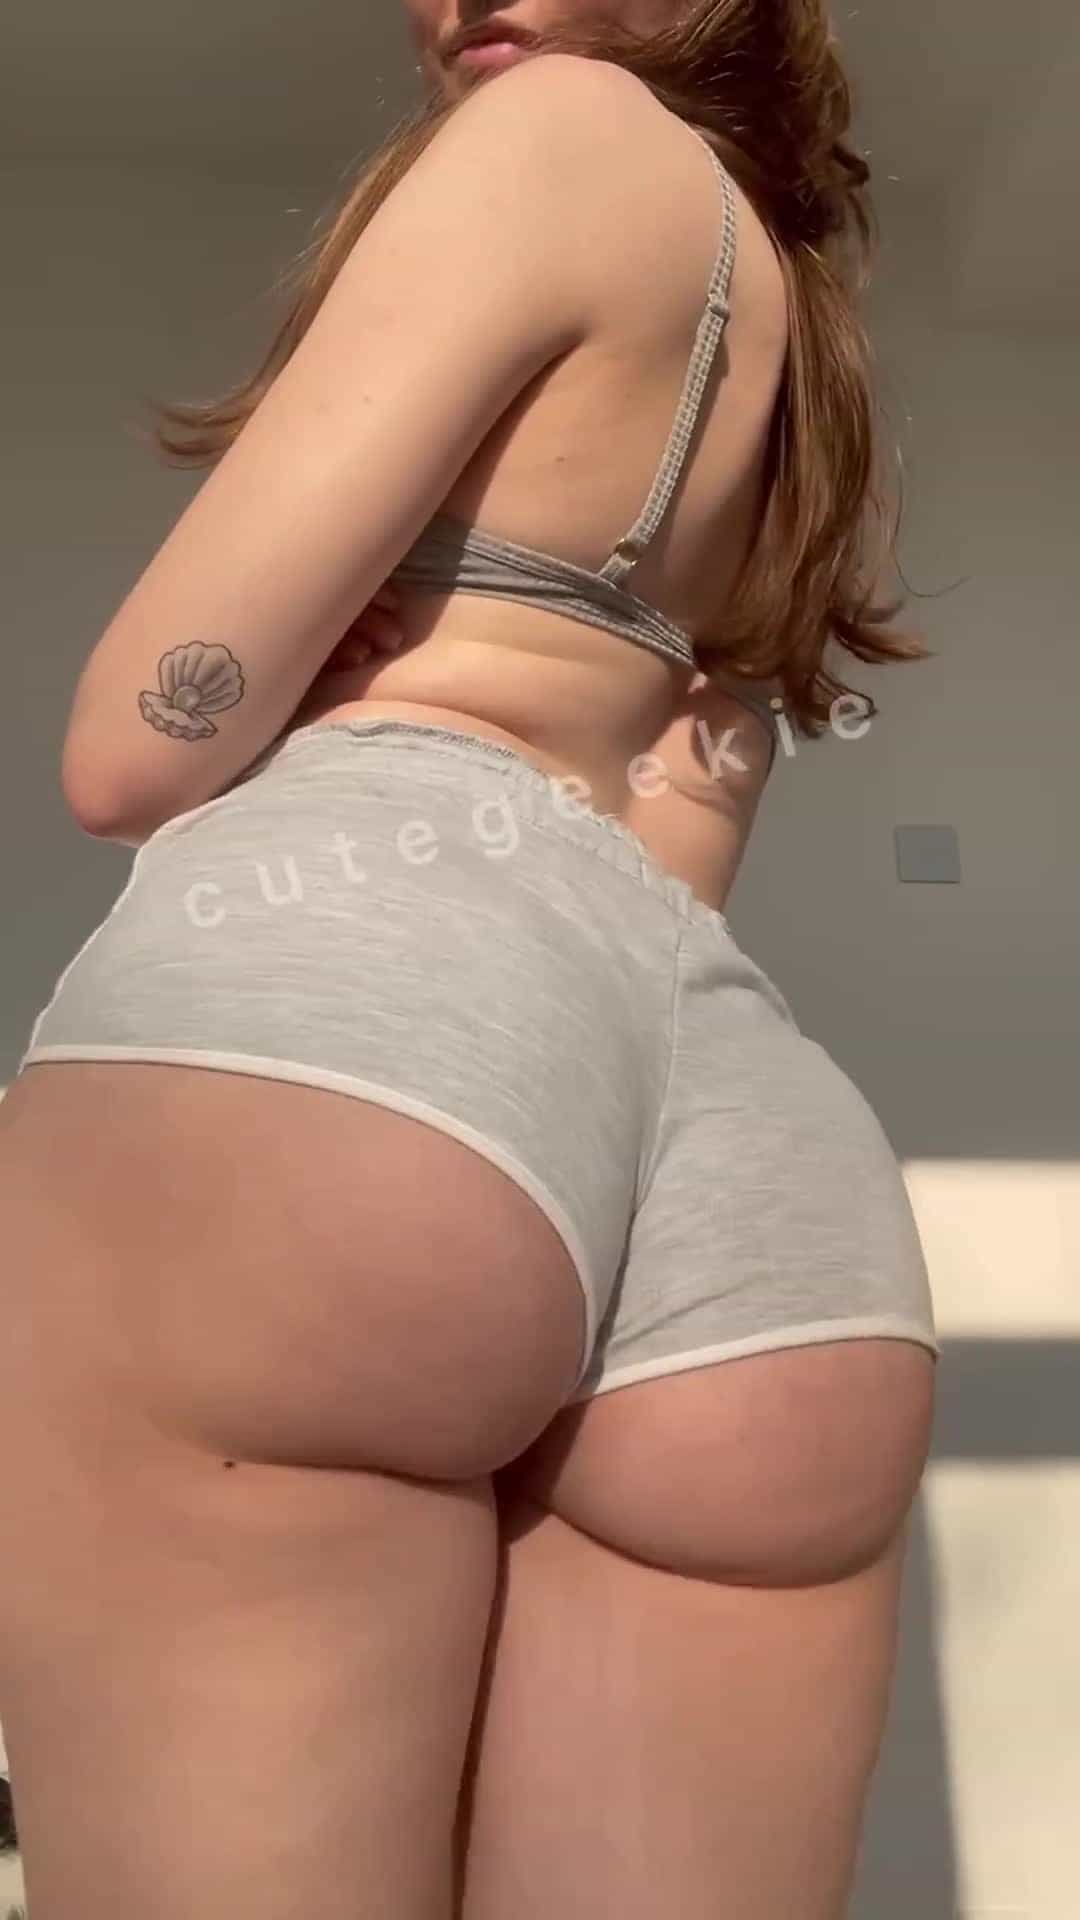 The more booty my shorts show, the better 